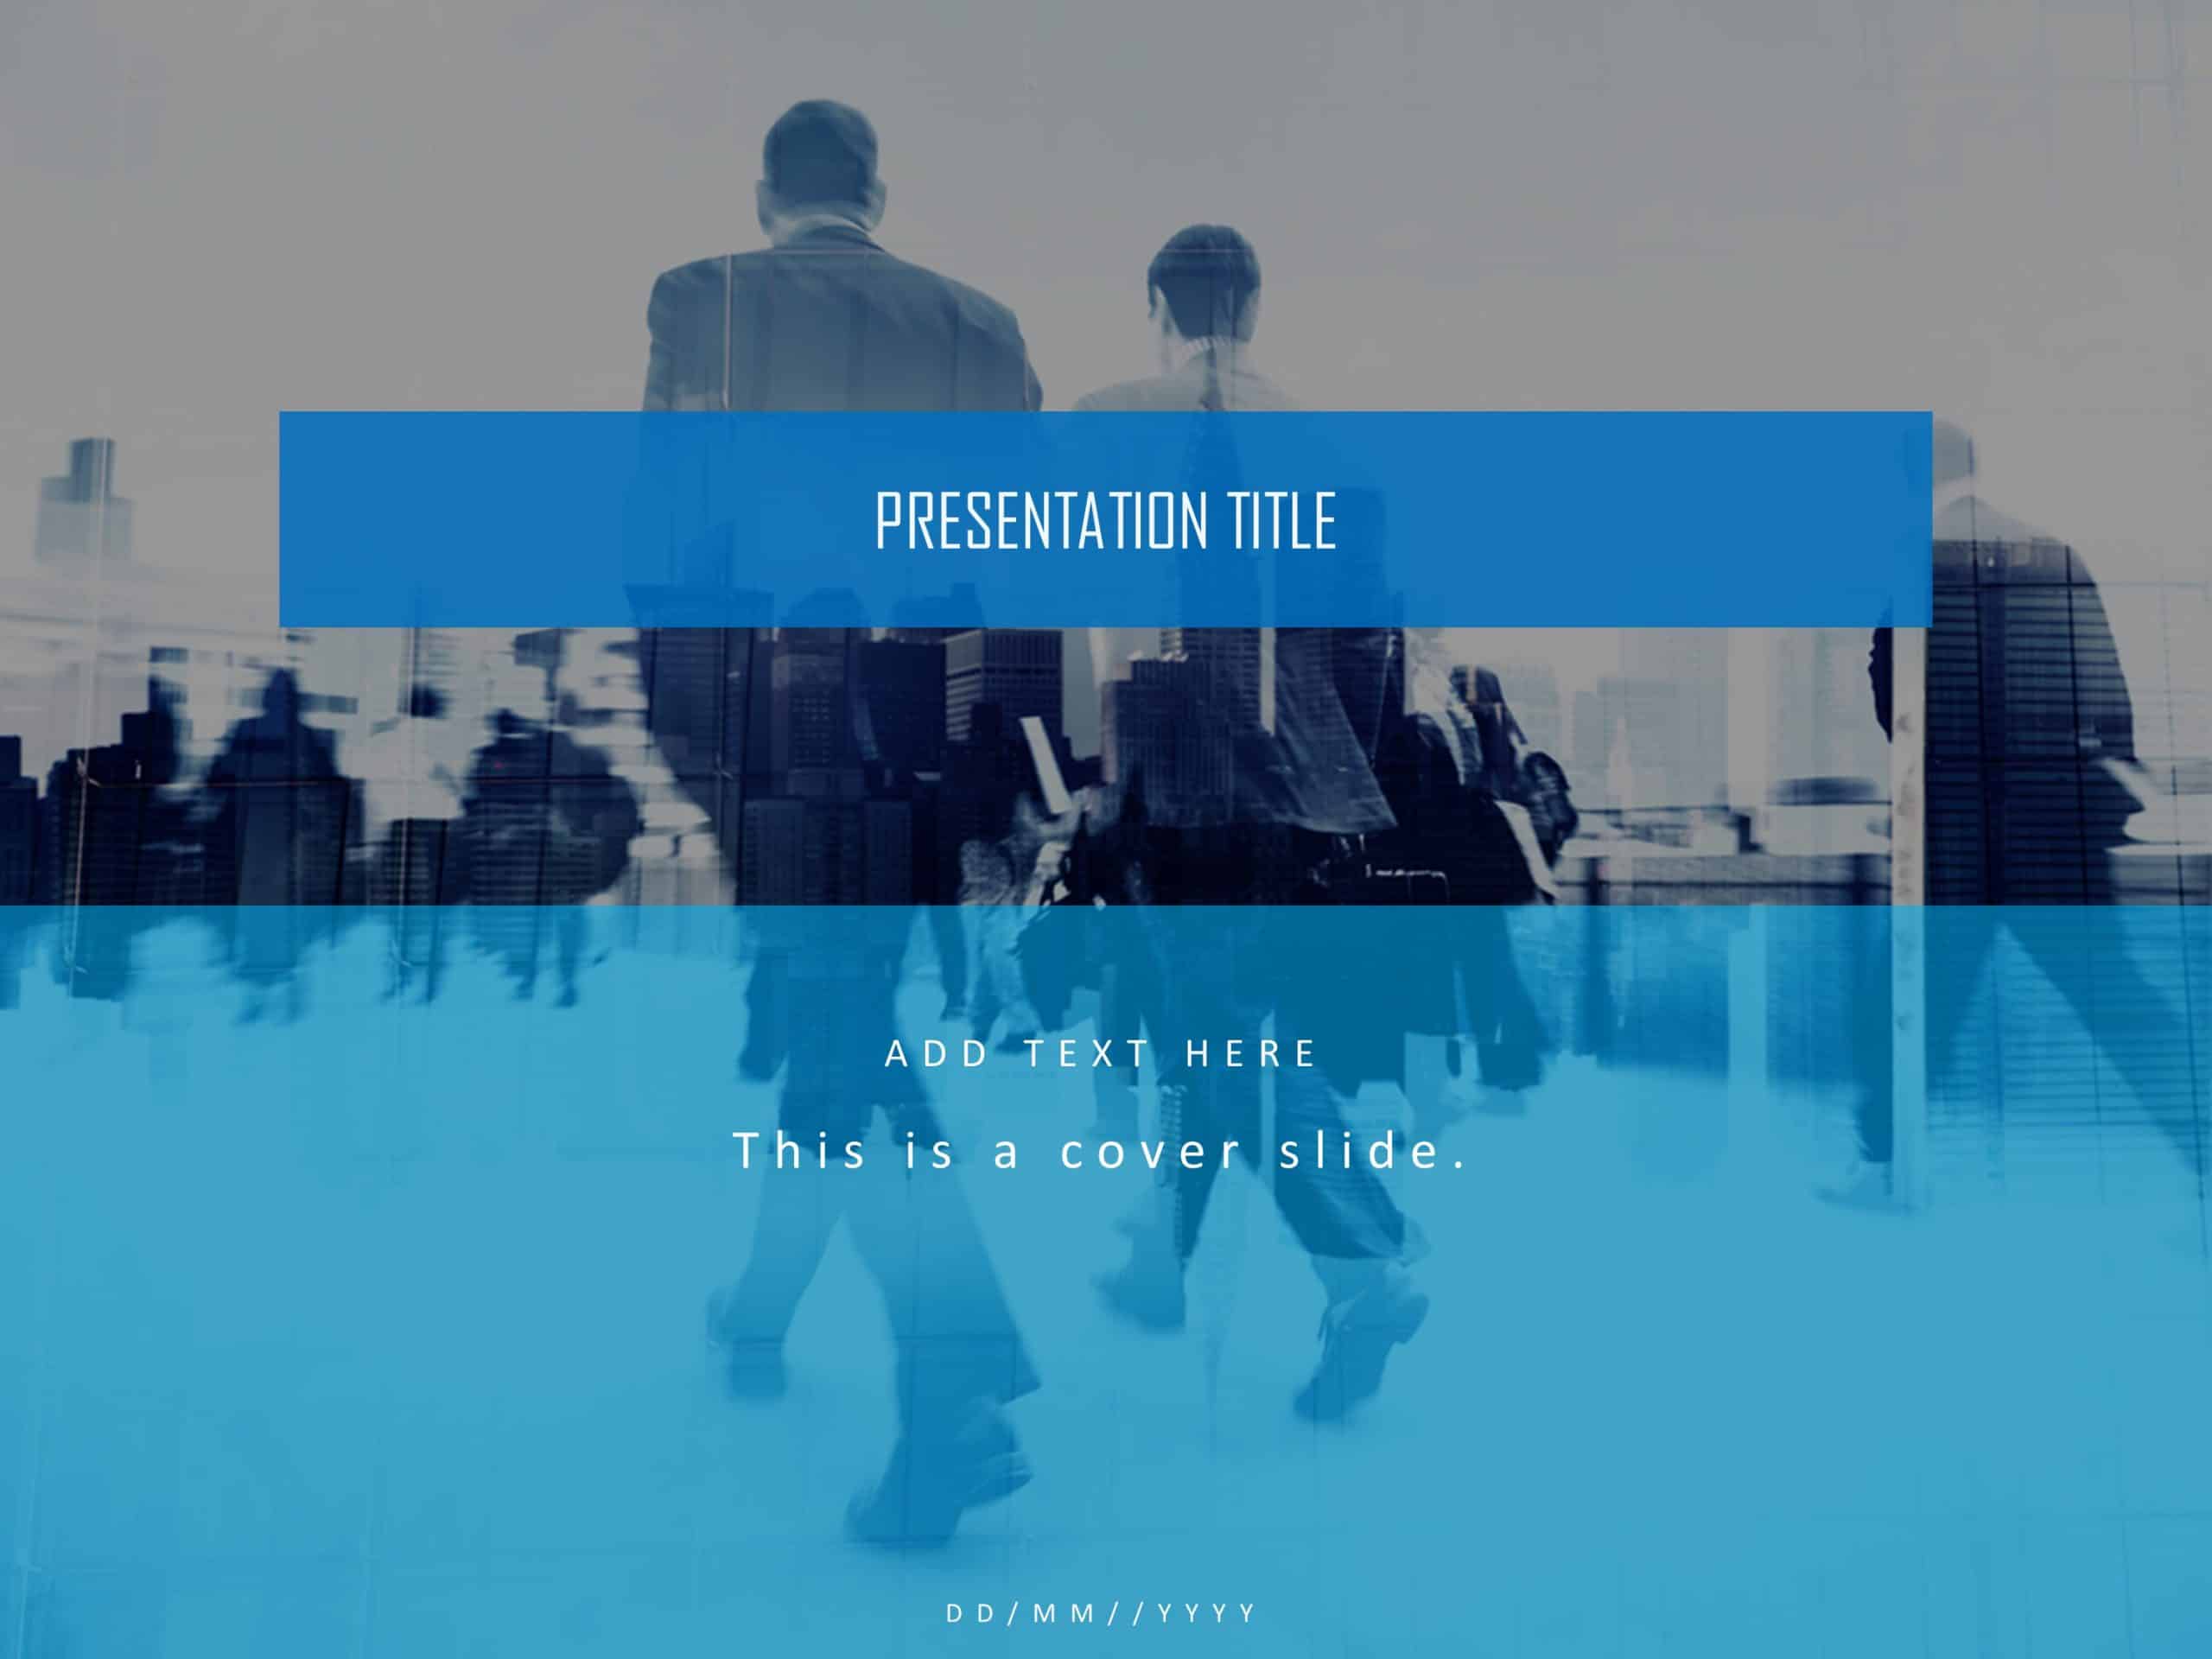 Company Profile Presentation Cover Slide PowerPoint Template